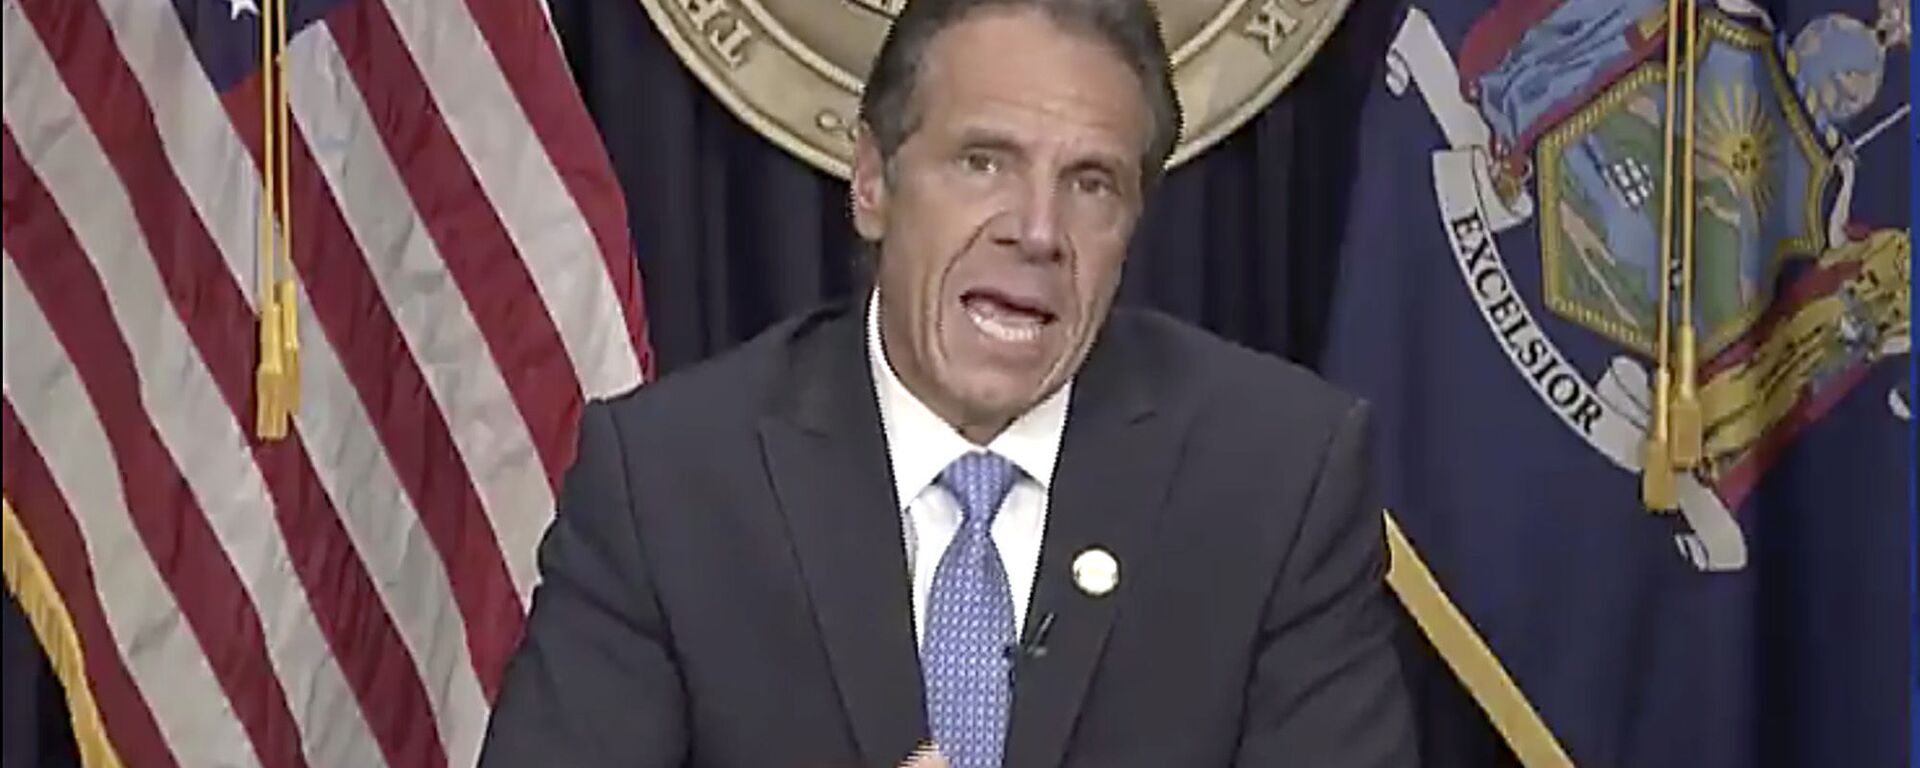 In this still image from video,  Gov. Andrew Cuomo speaks during a news conference in Albany, N.Y. on Tuesday, Aug. 10, 2021.  Cuomo has resigned over a barrage of sexual harassment allegations in a fall from grace a year after he was widely hailed nationally for his detailed daily briefings and leadership during the darkest days of COVID-19. (Office of the Governor of New York via AP) - Sputnik International, 1920, 14.08.2021